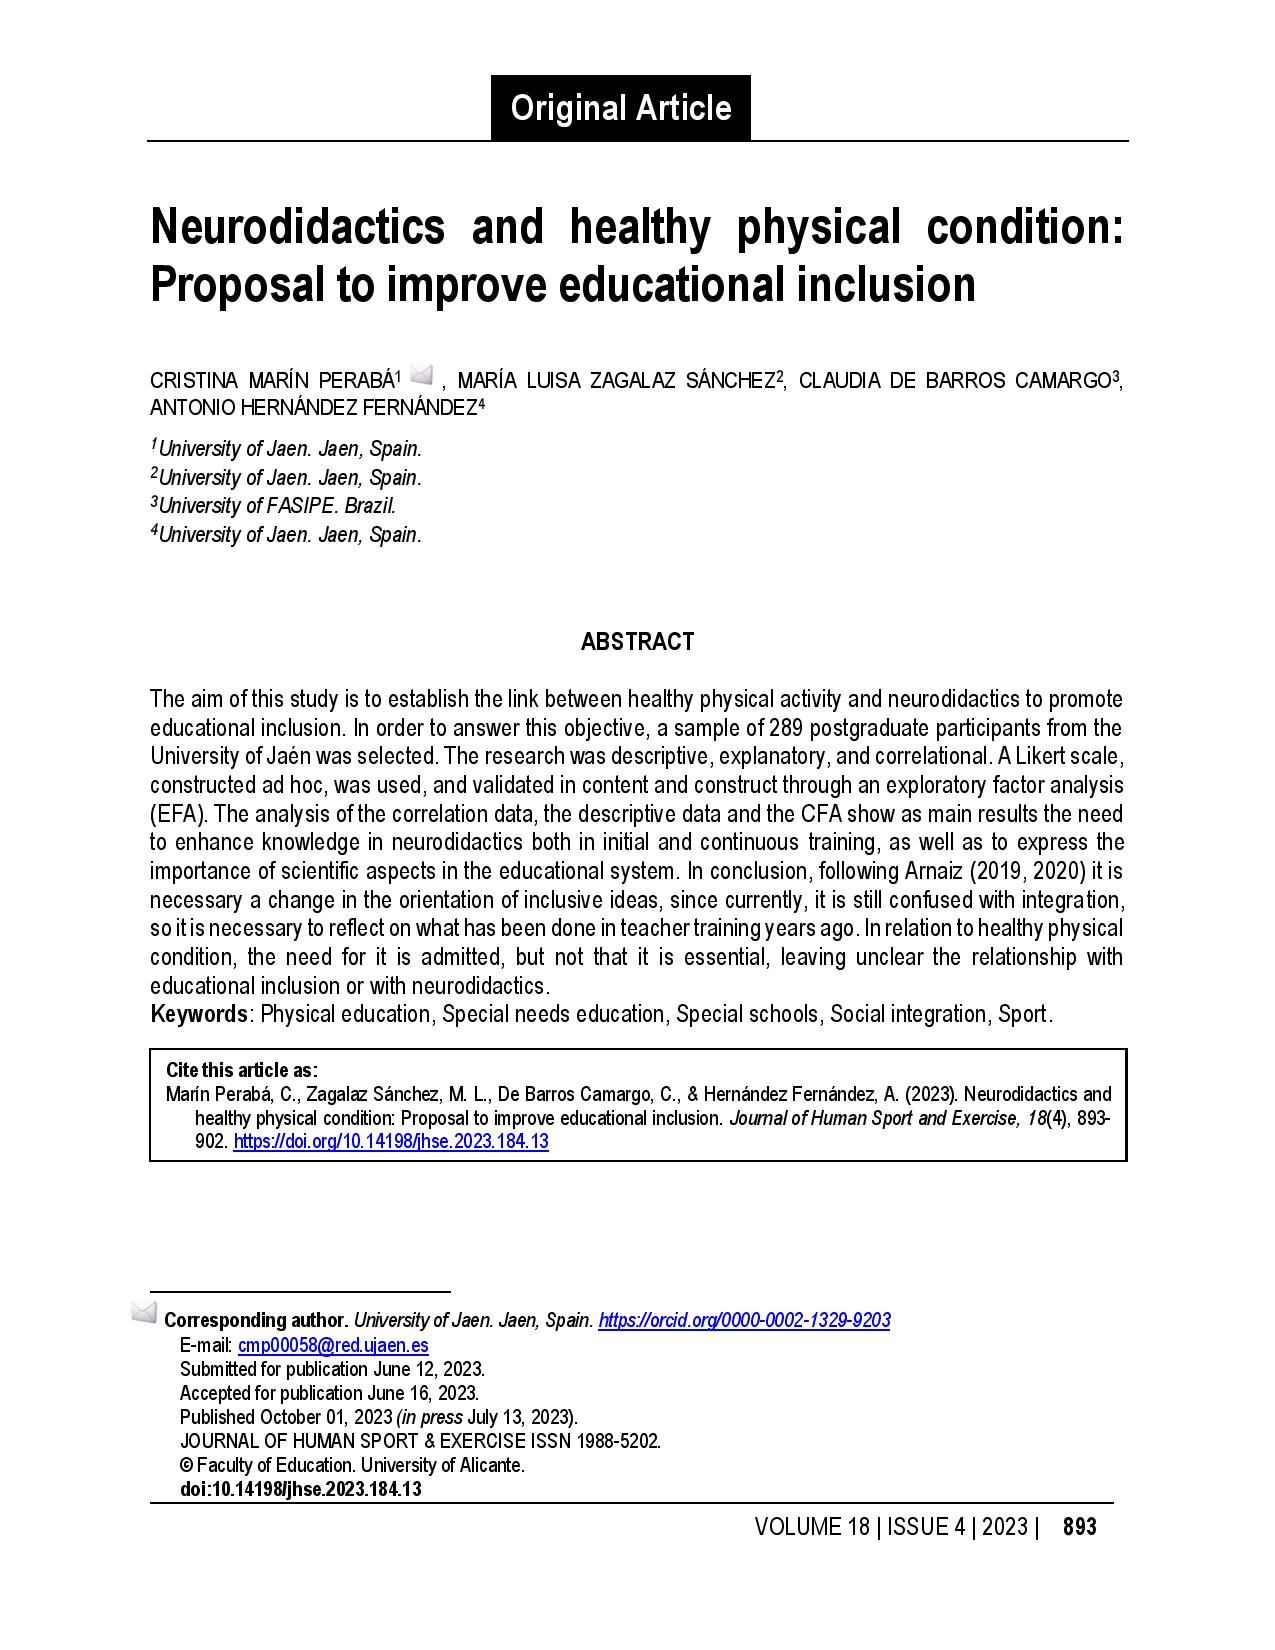 Neurodidactics and healthy physical condition: Proposal to improve educational inclusion